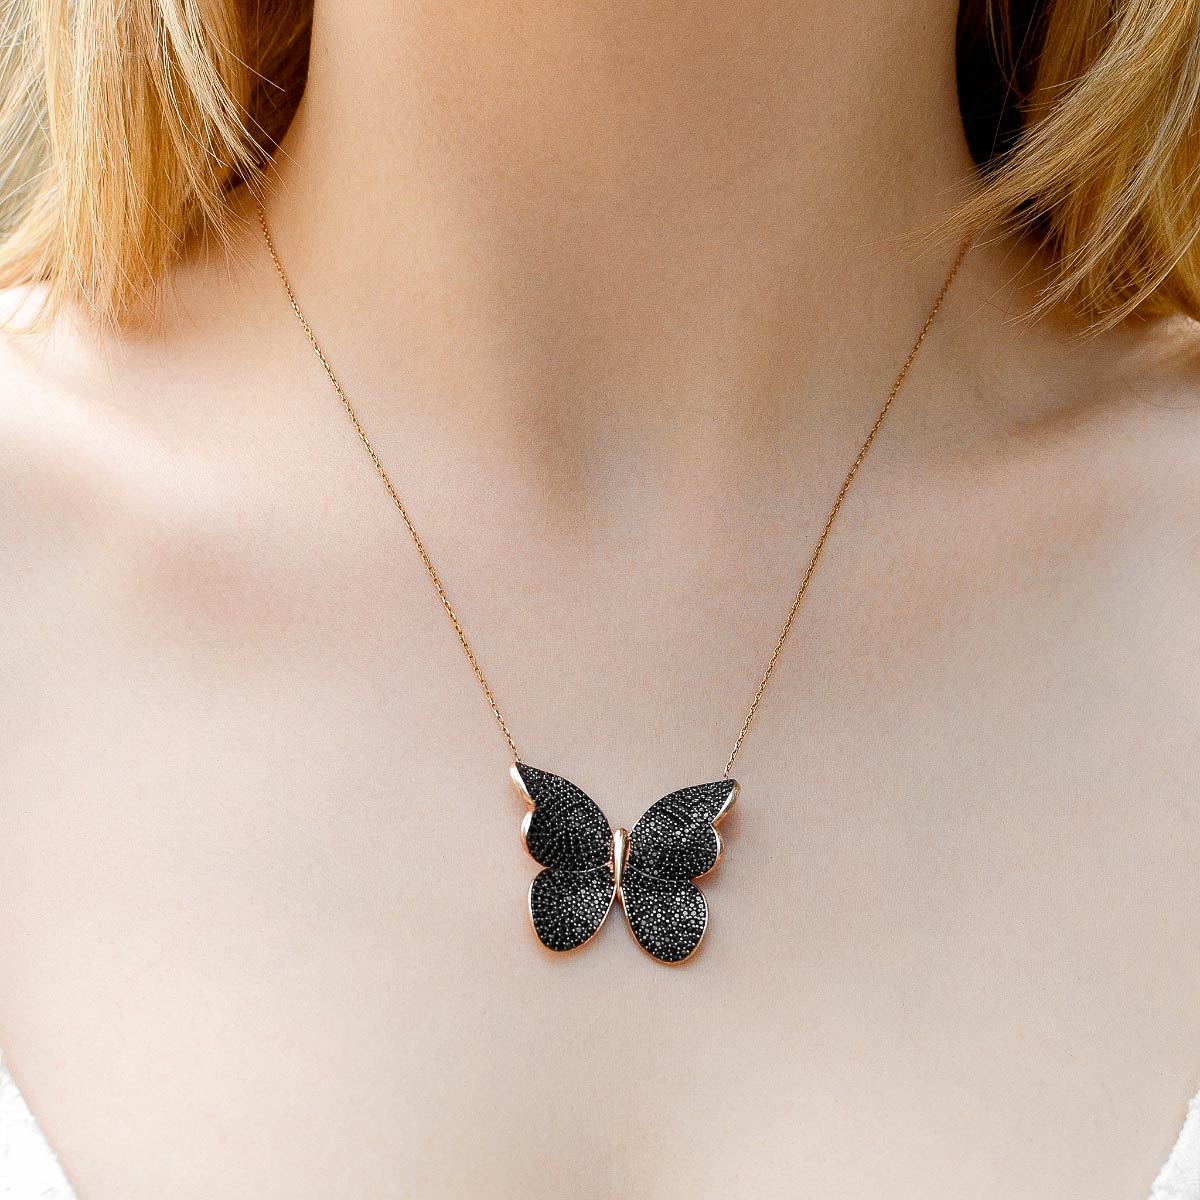 FREE GIFT WITH PURCHASE - Black Crystal Butterfly Necklace + Night Fever Hoop Earrings